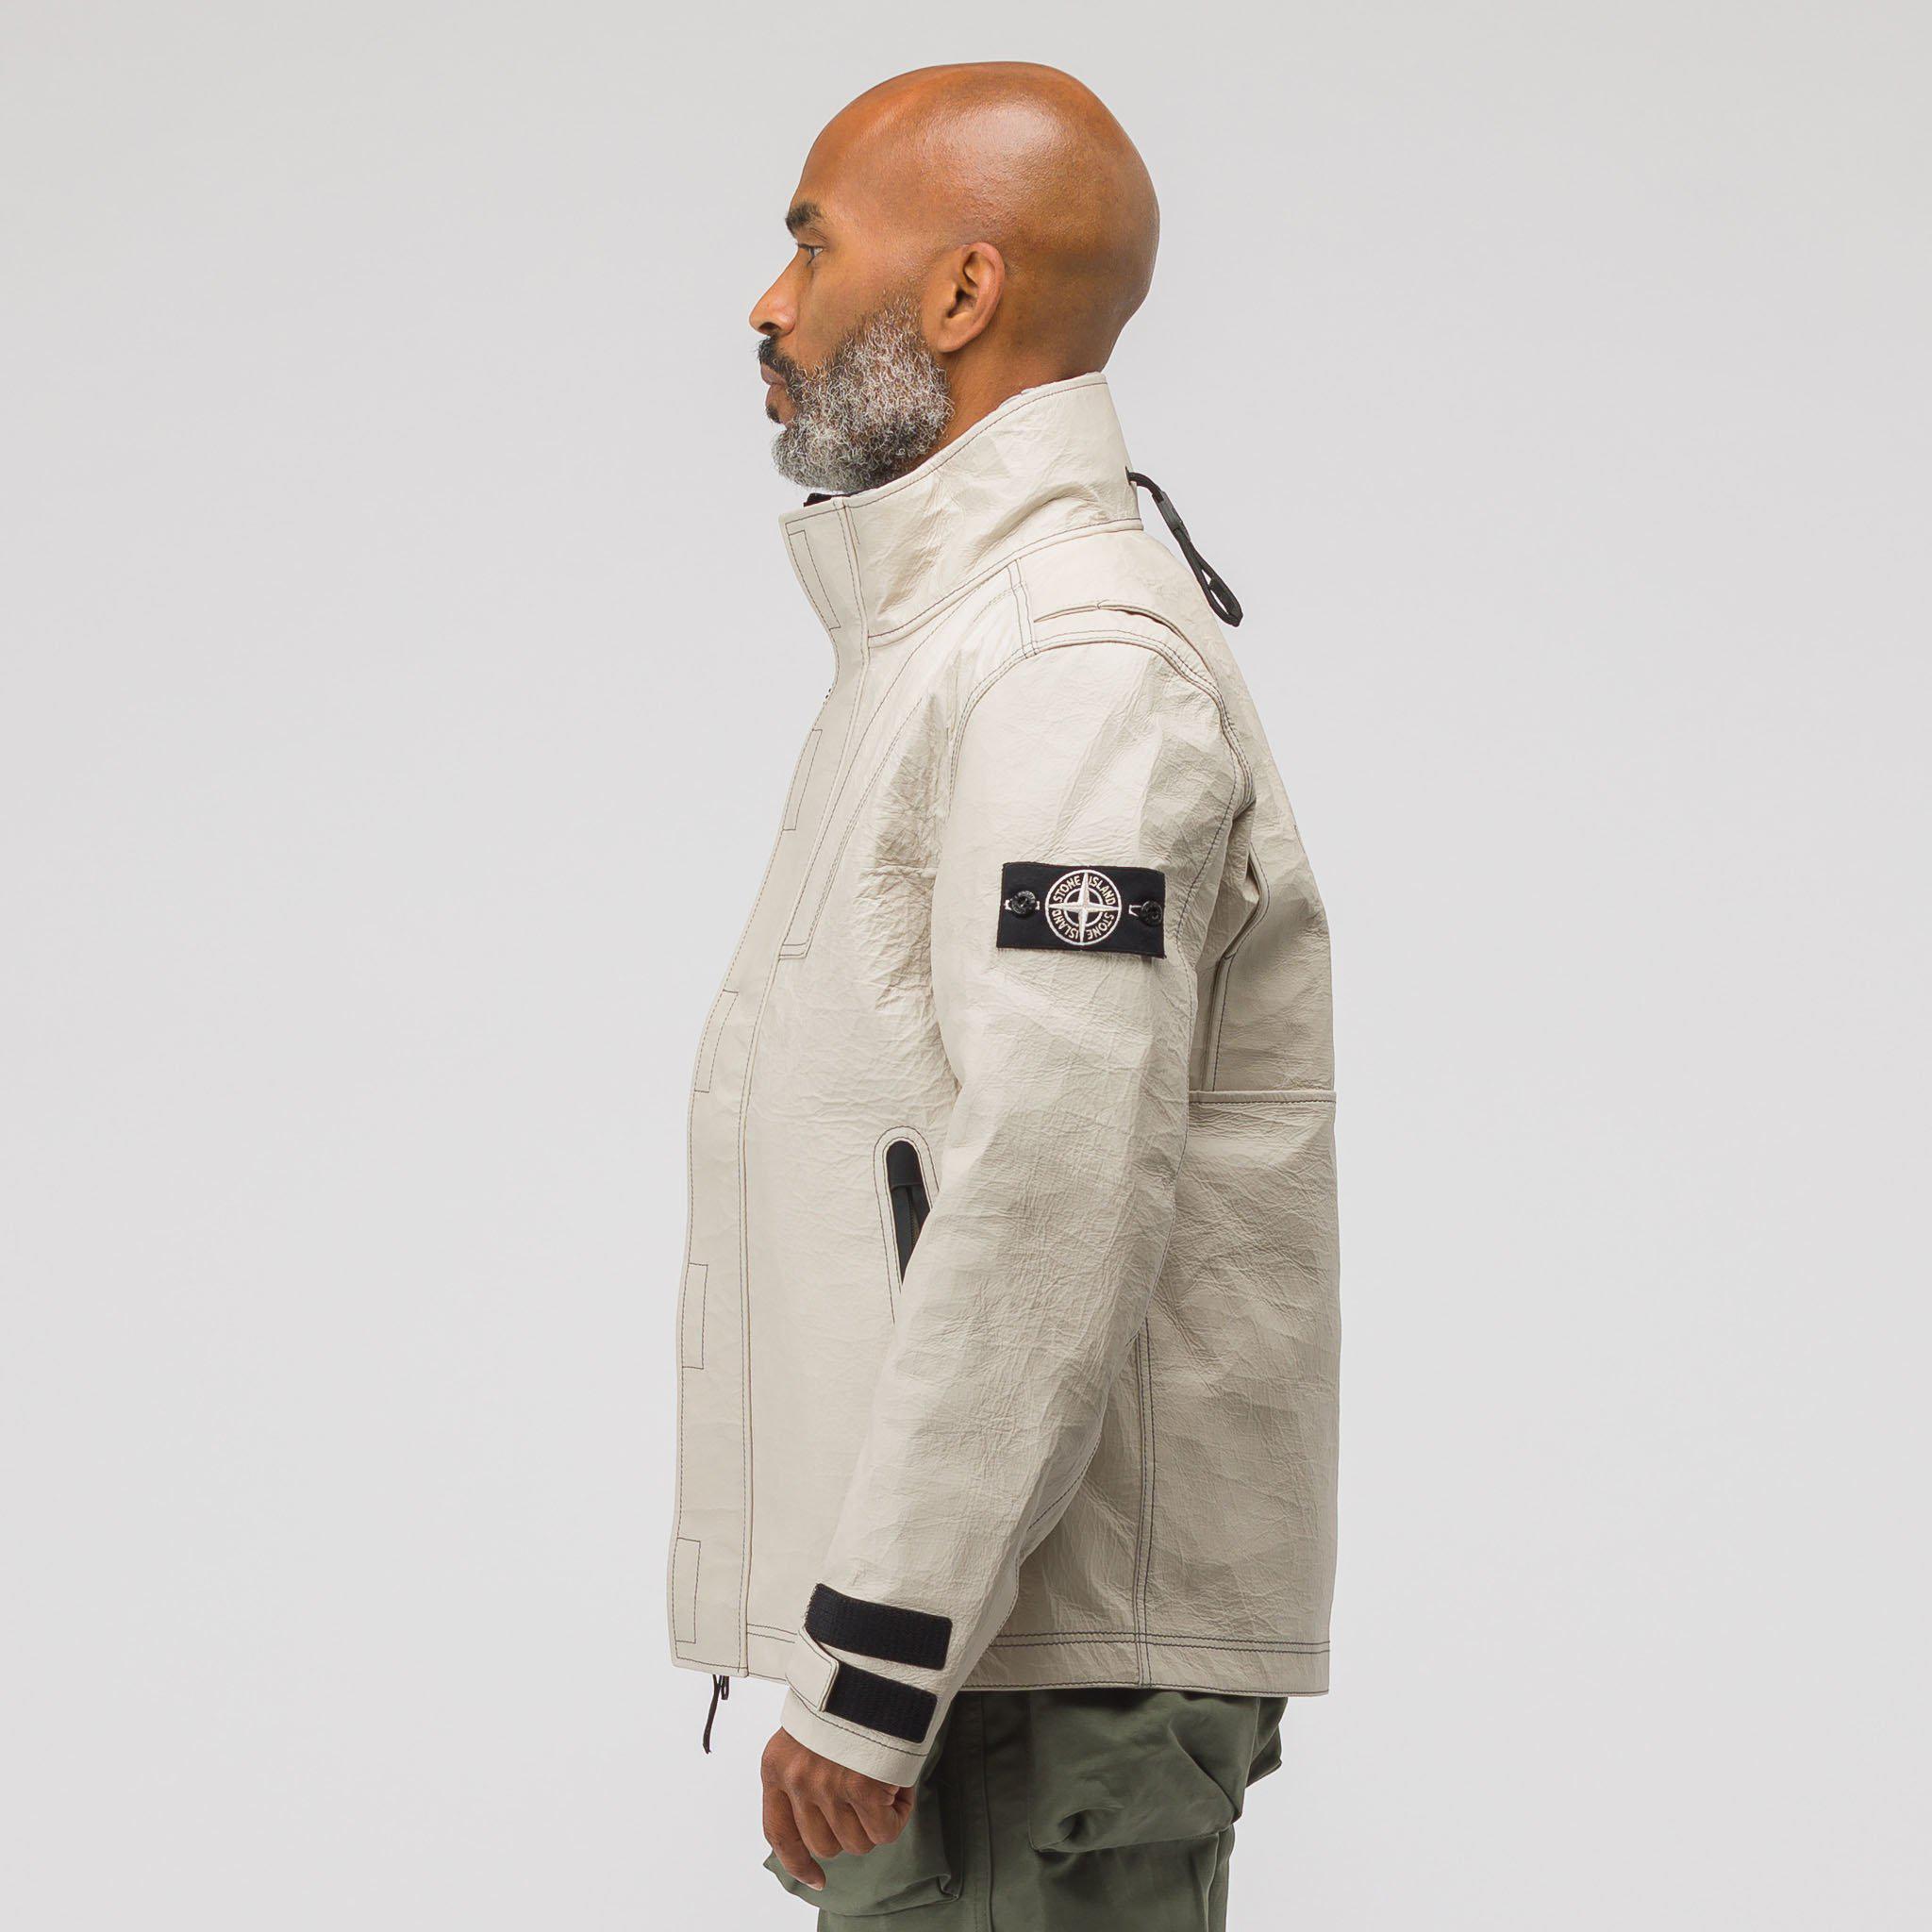 stone island ice jacket in dyneema bonded leather,Limited Time  Offer,slabrealty.com